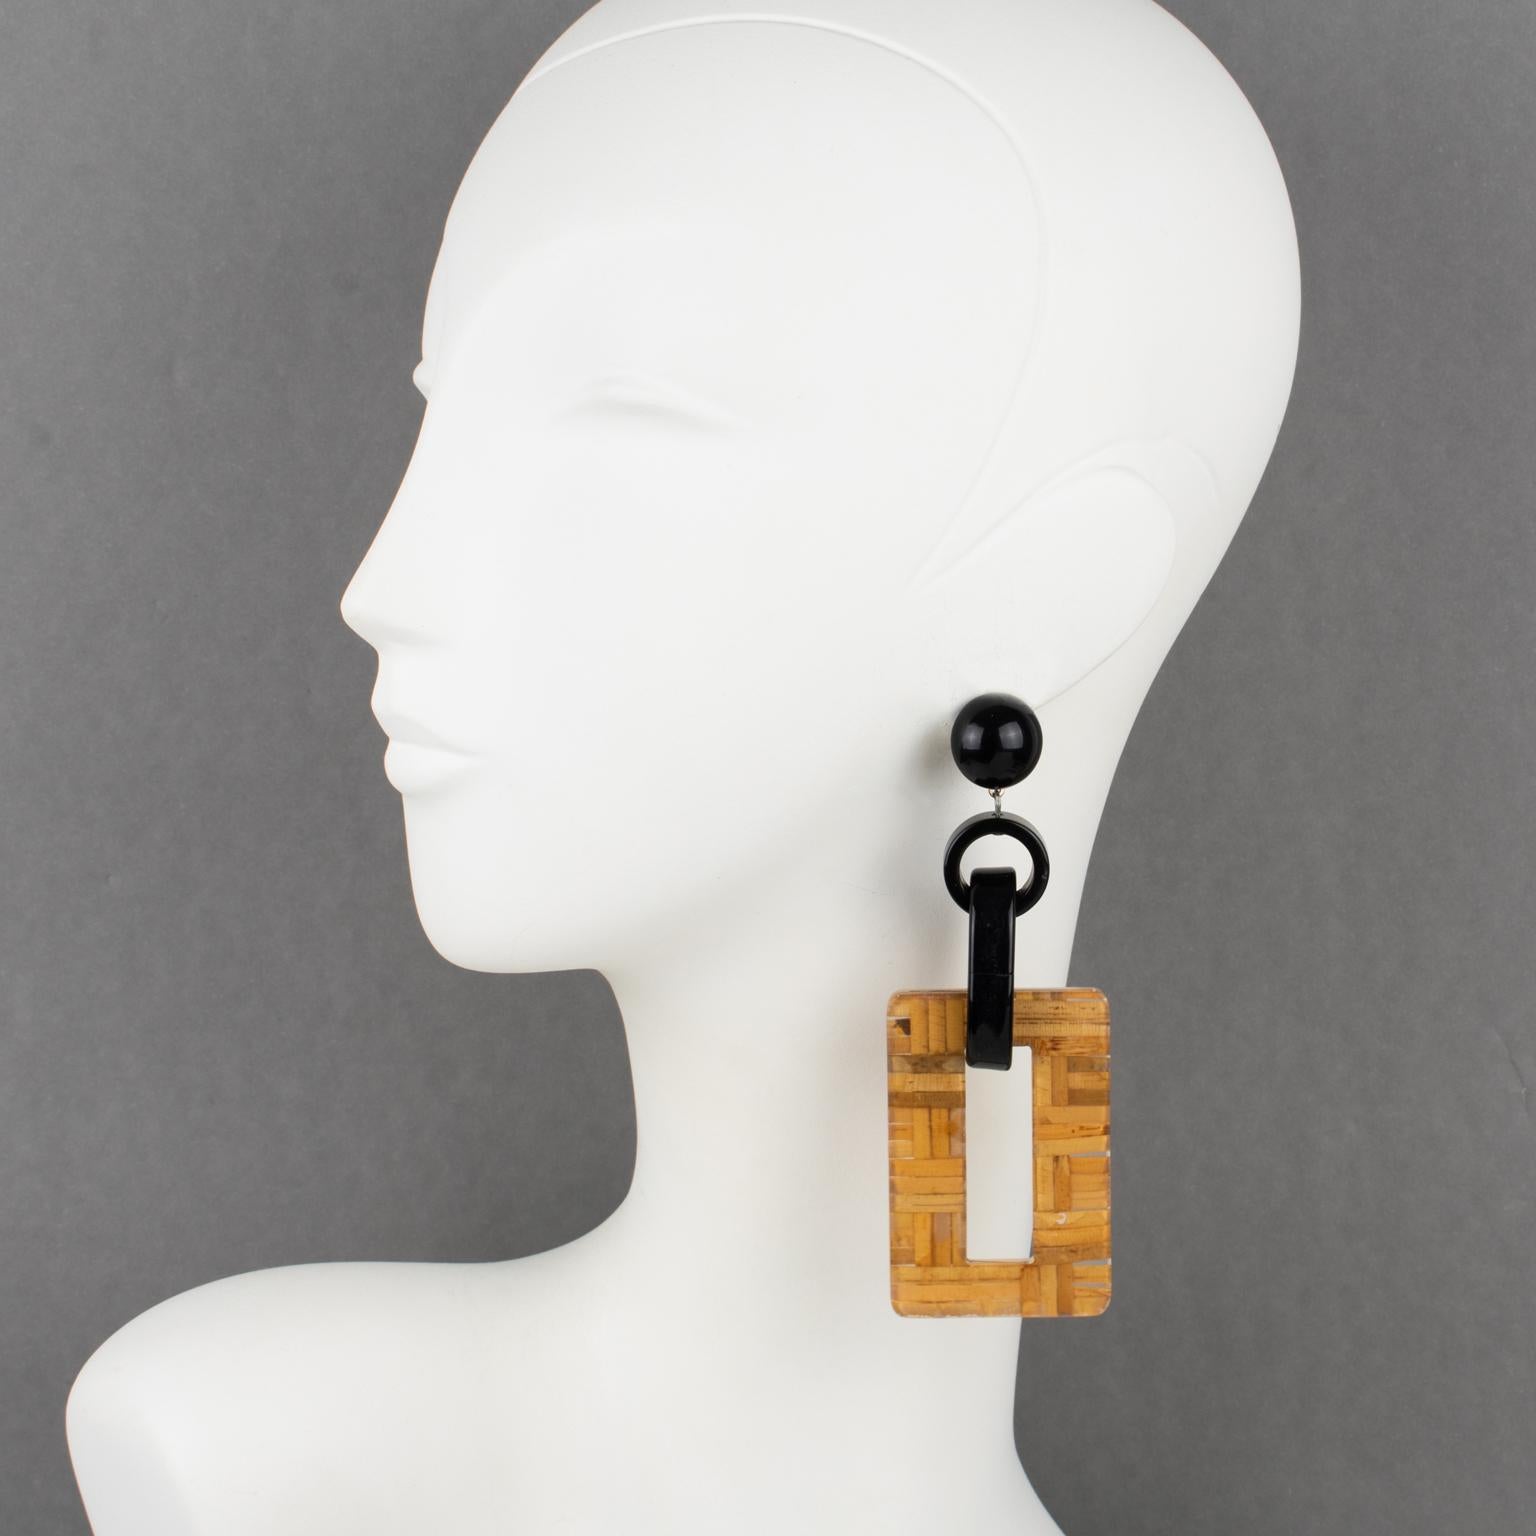 Stunning Angela Caputi made in Italy, oversized resin, and Lucite pierced earrings. A dangling shape with black resin geometric elements contrasted with a massive rectangular donut element in clear Lucite with embedded rattan or wicker. Her matching